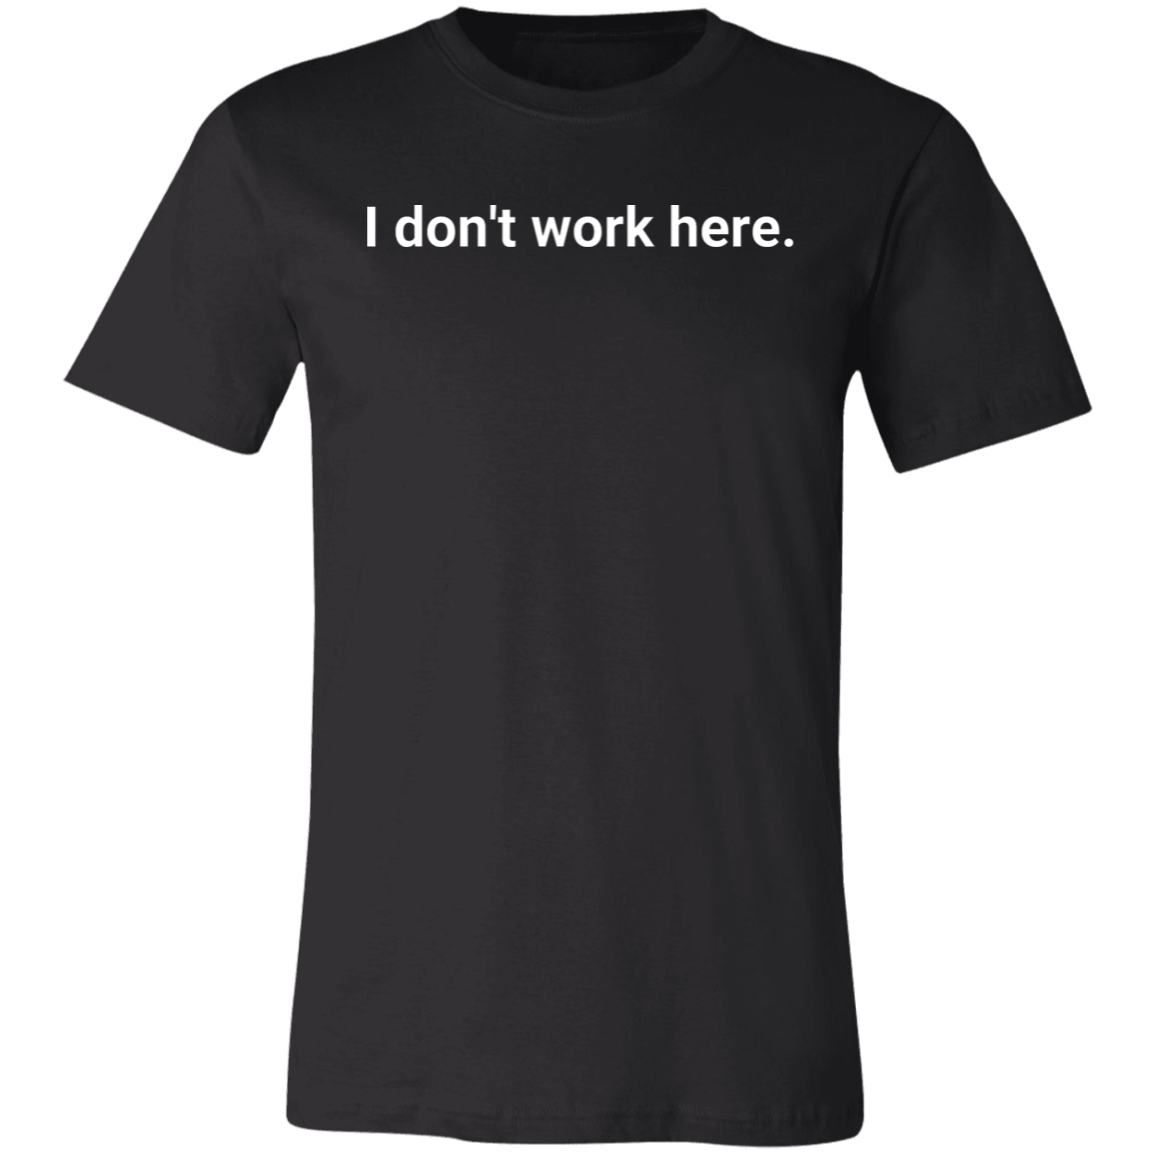 I Don't Work Here Short-Sleeve T-Shirt